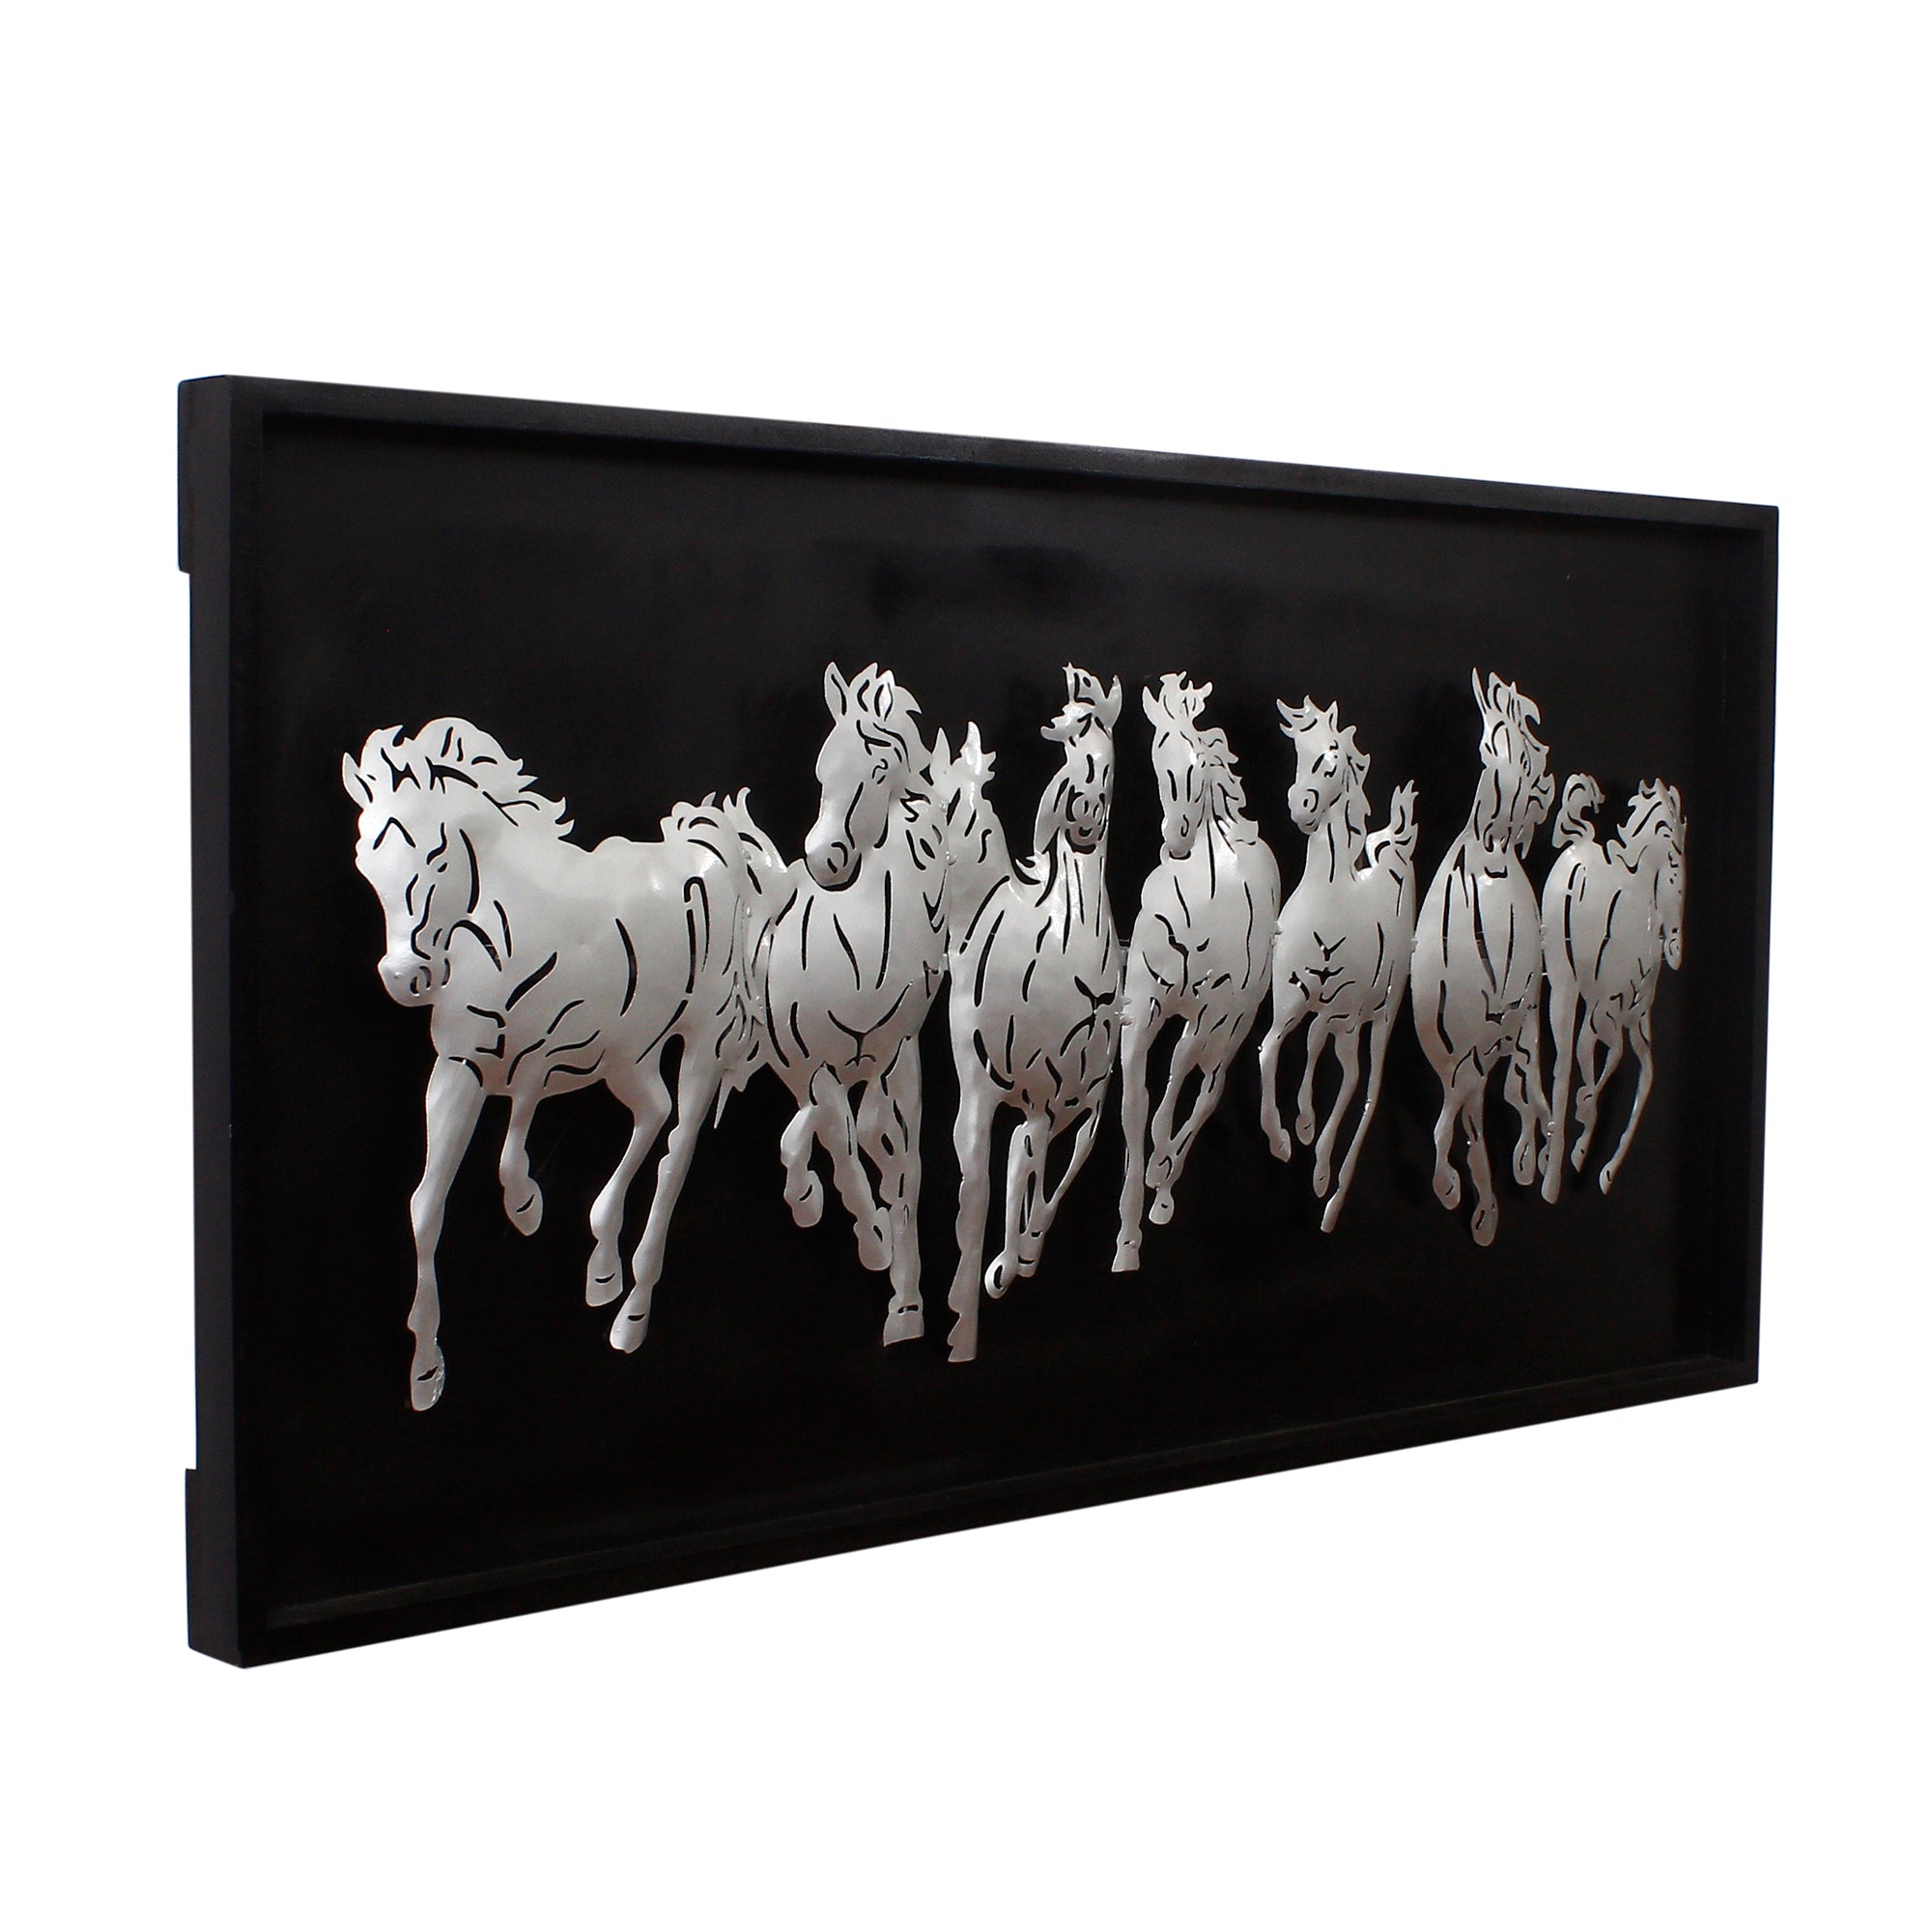 Black and Silver 7 Running Horses empanalled in Wooden Frame Handcrafted Metal Wall Hanging with Background LED's 4